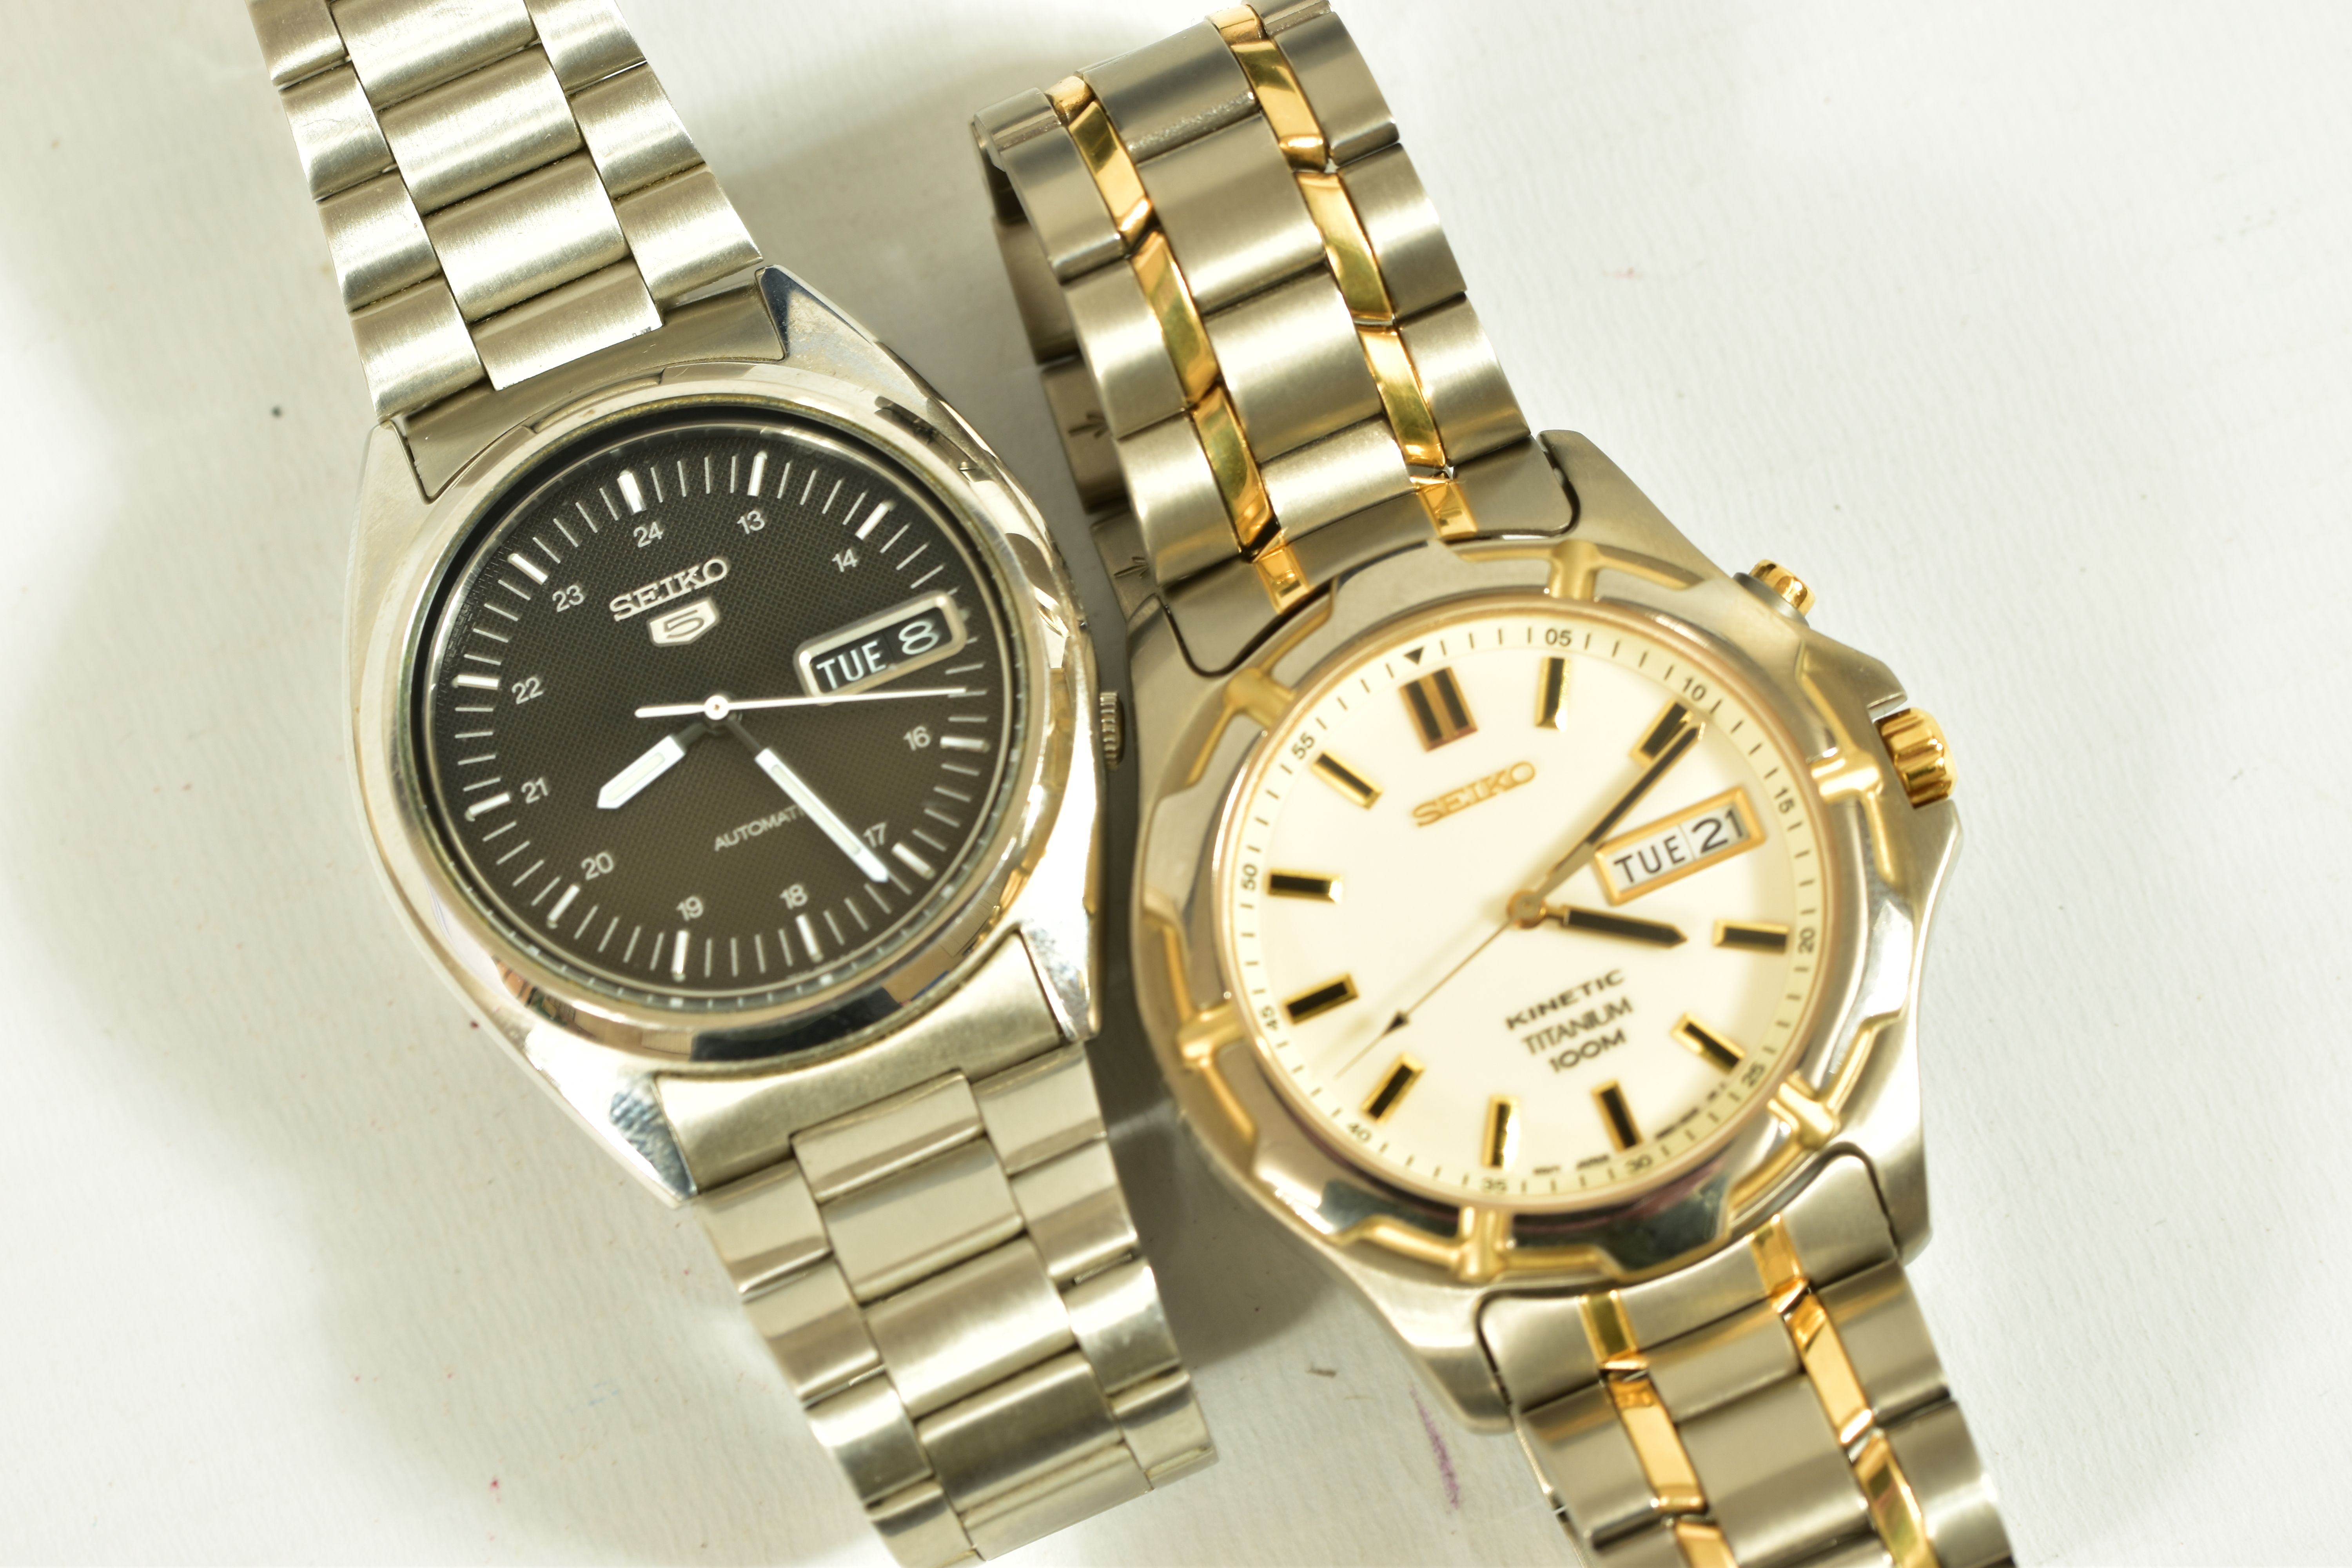 TWO SEIKO WRISTWATCHES, the first a Seiko Kinetic Titanium watch, cream dial with gold and black